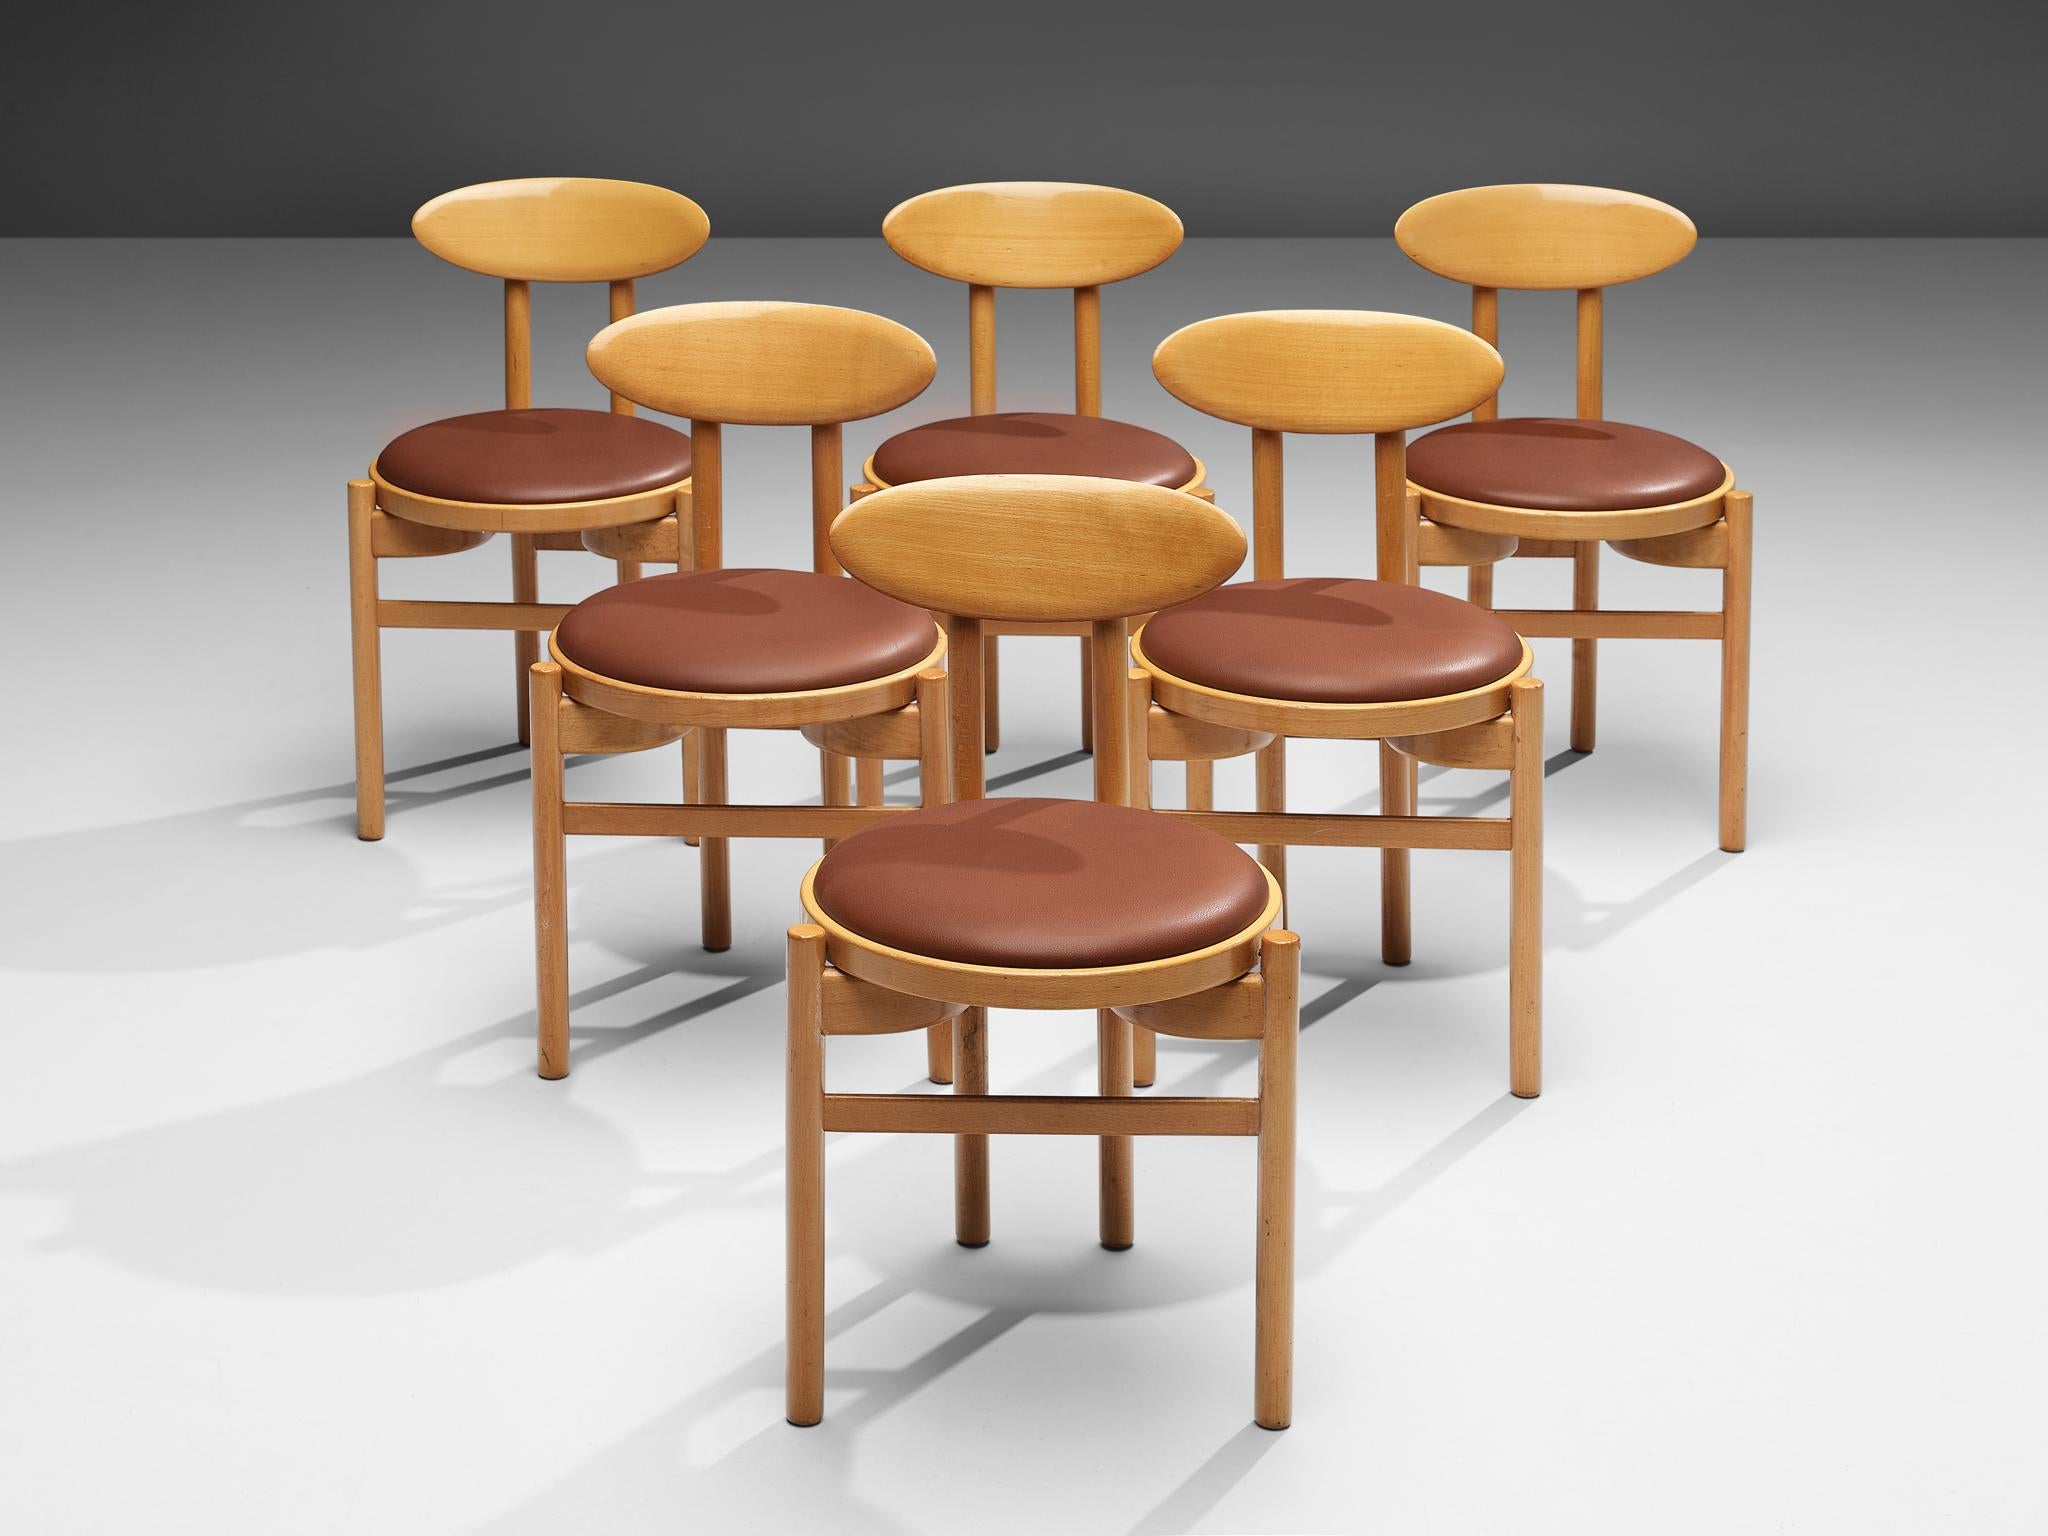 Pozzi, dining chairs, beech, leatherette, Italy, 1970s

With their round seats and oval backrests these dining chairs by Italian manufacturer Pozzi have a dynamic, almost playful appearance. Two round legs in front and two paired legs in the back